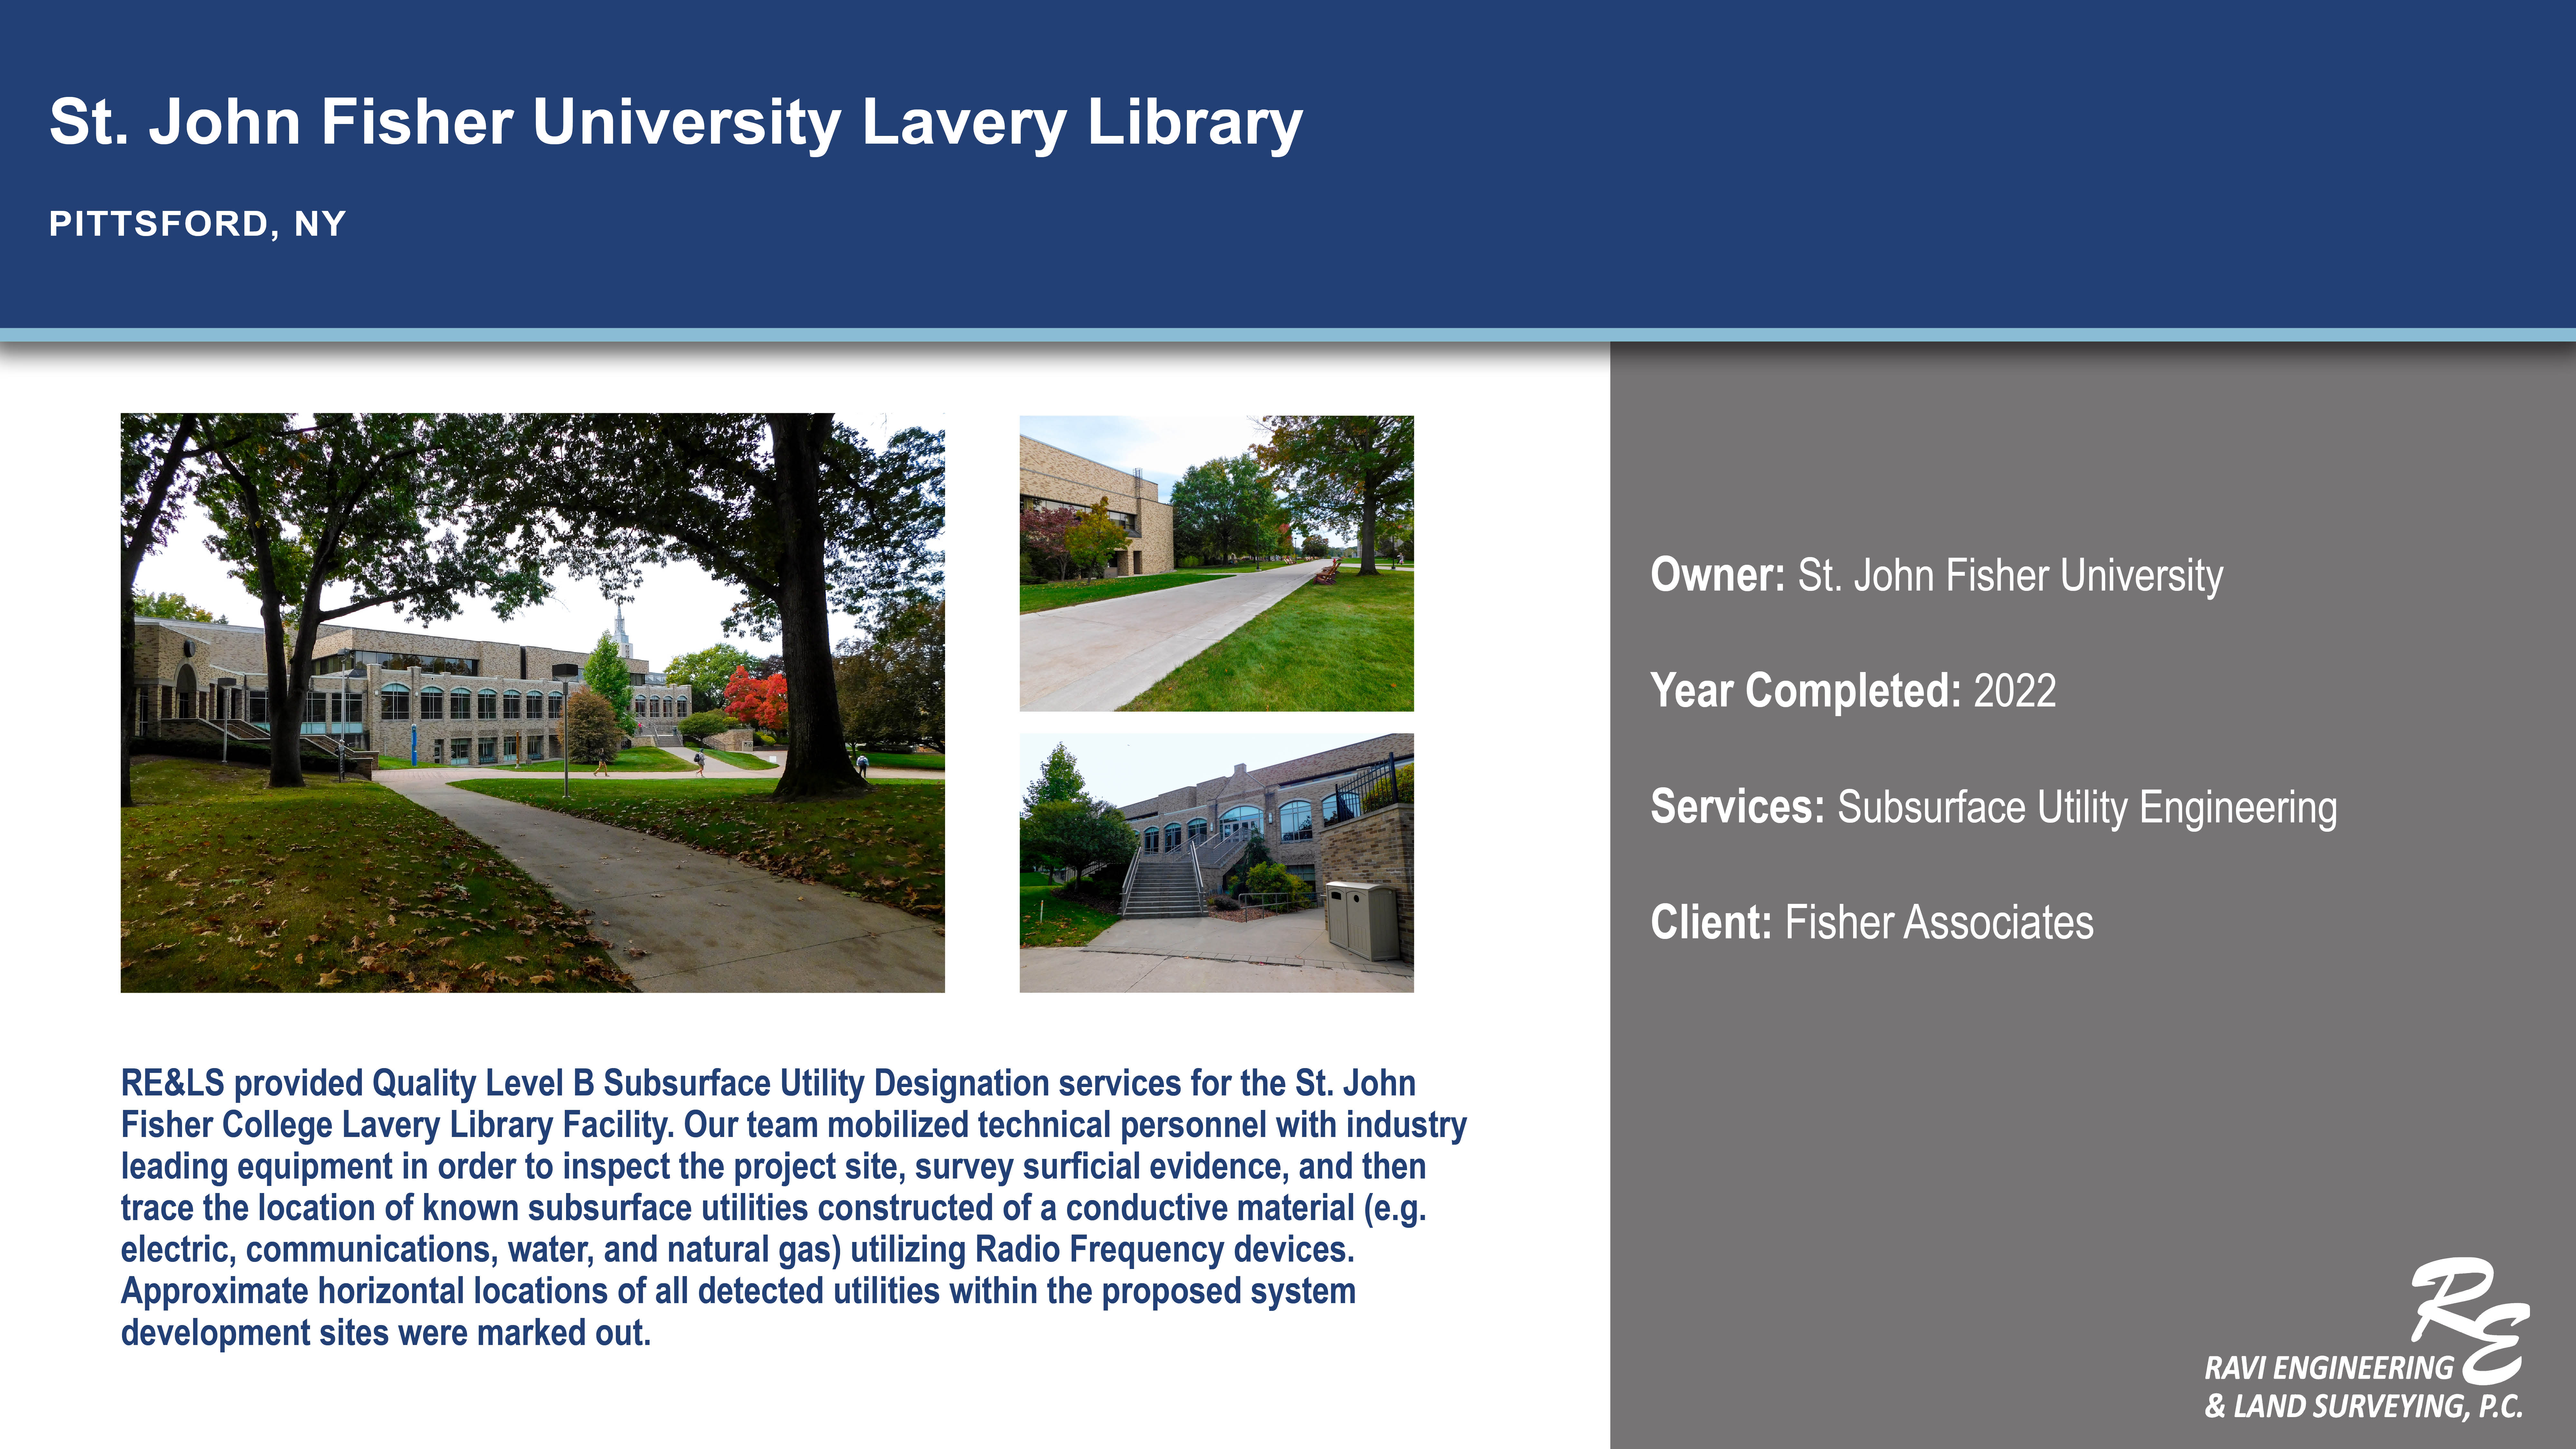 St. John Fisher Lavery Library